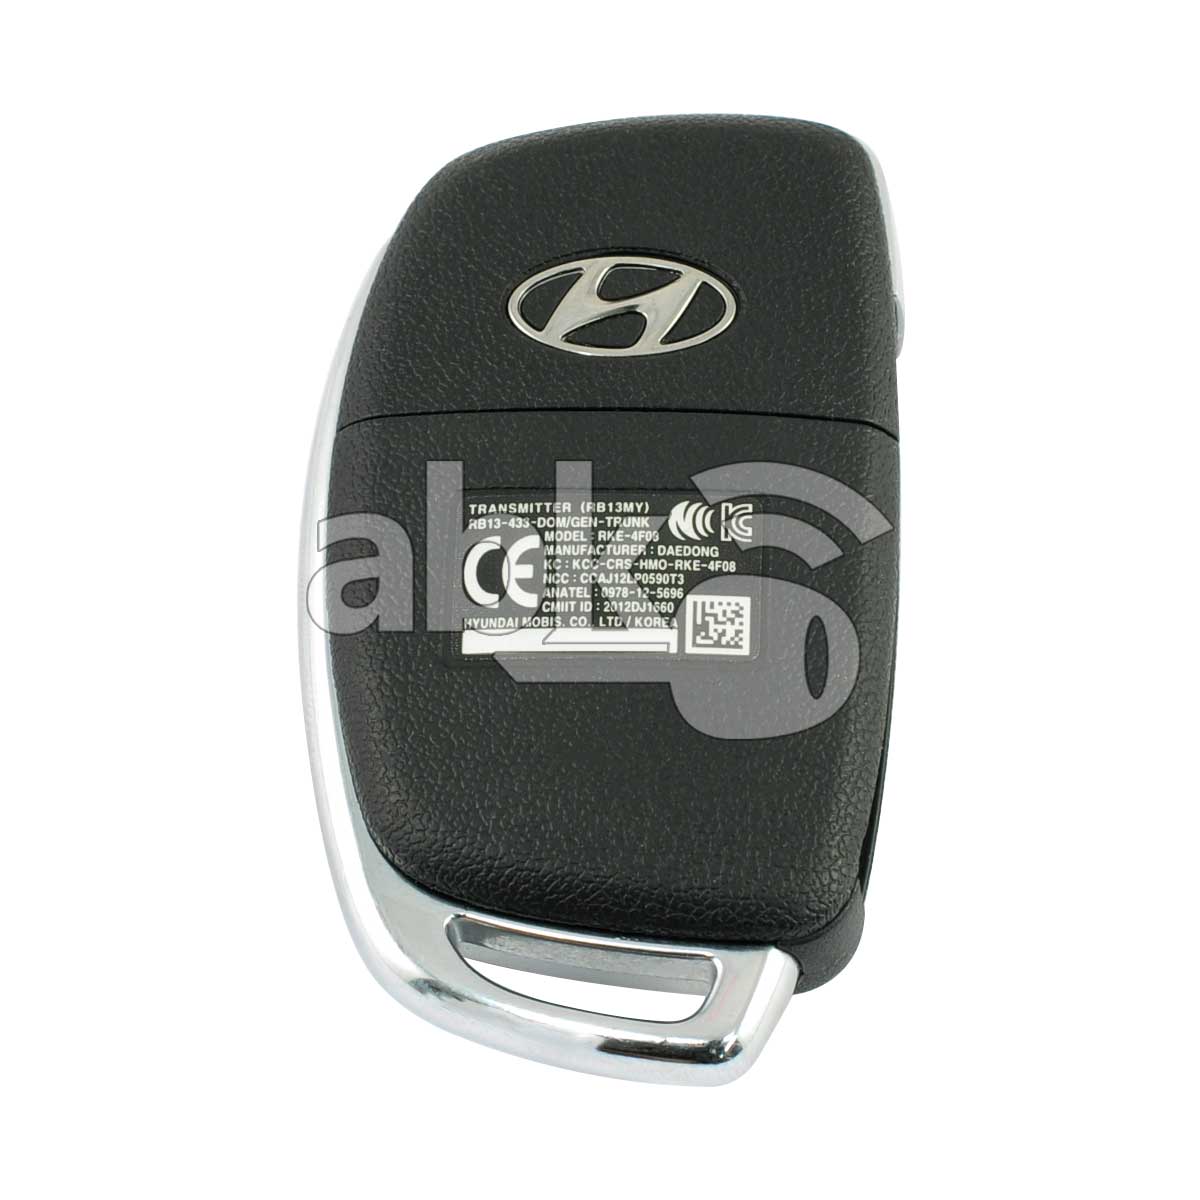 Genuine Hyundai Accent 2013+ Flip Remote 3Buttons 95430-1RAA1 95430-1RAB1 433MHz RB13-433-DOM